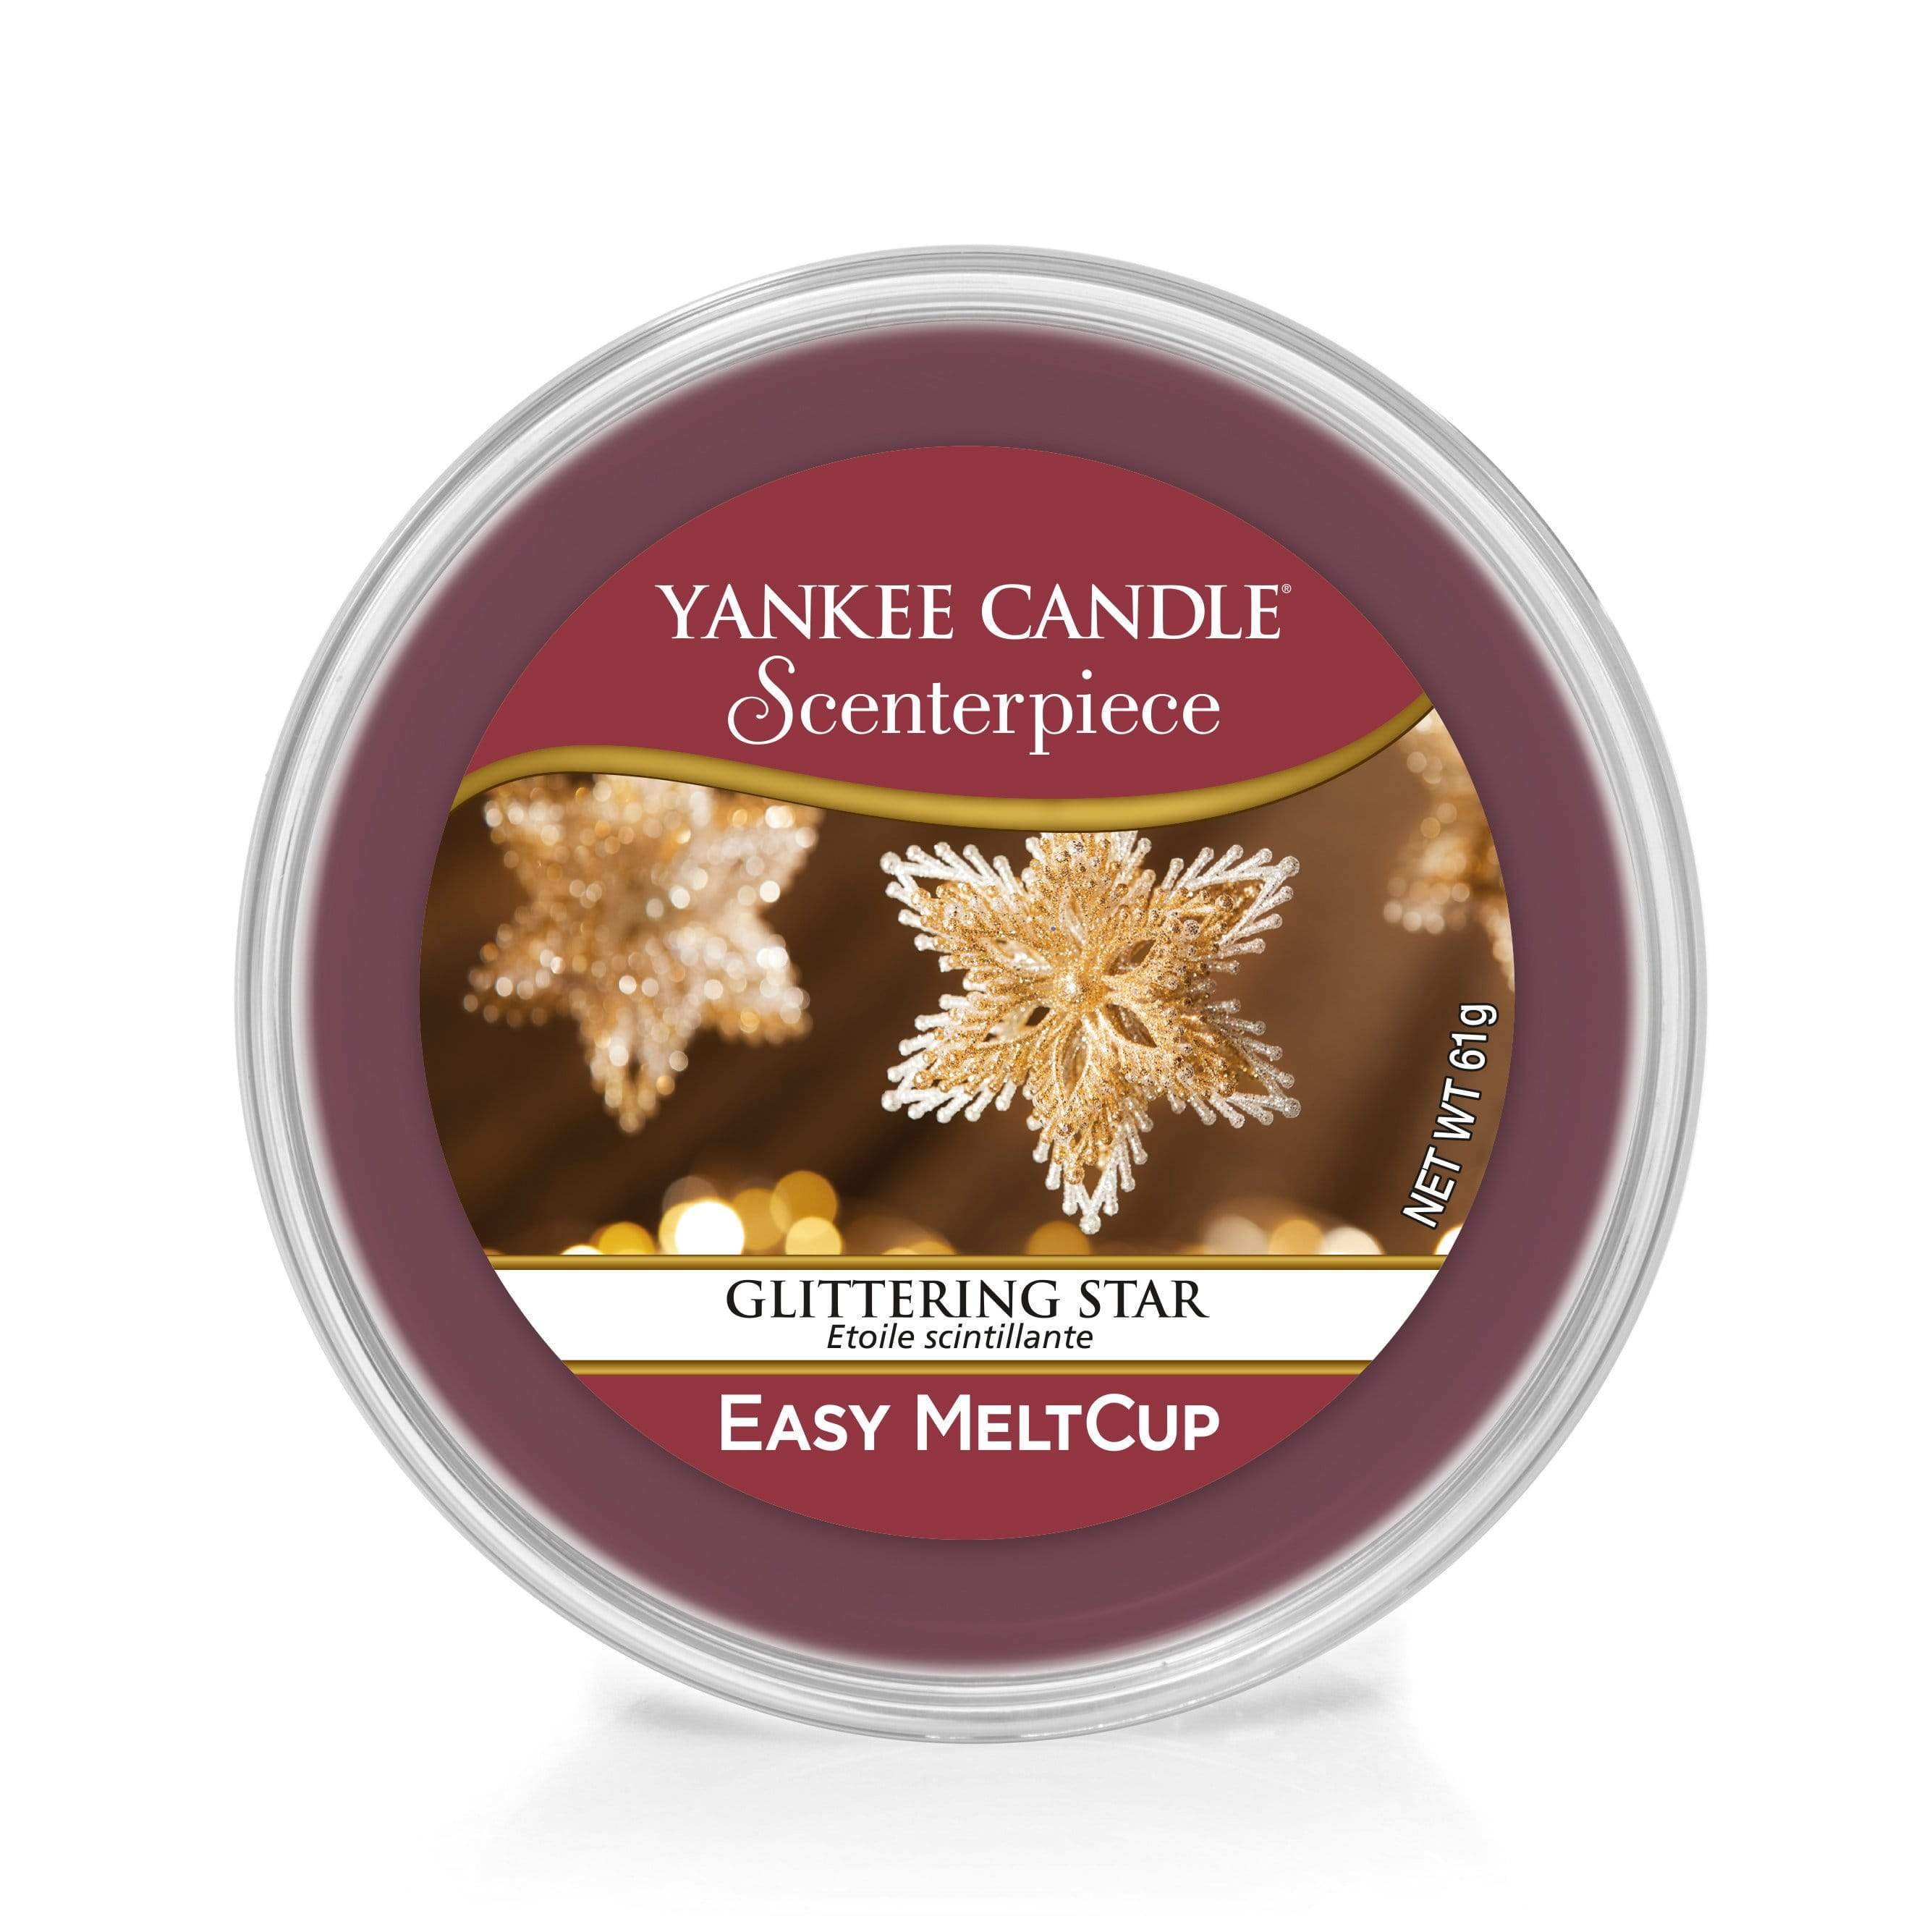 Yankee Candle Melt Cup Yankee Candle Scenterpiece Melt Cup - Glittering Star